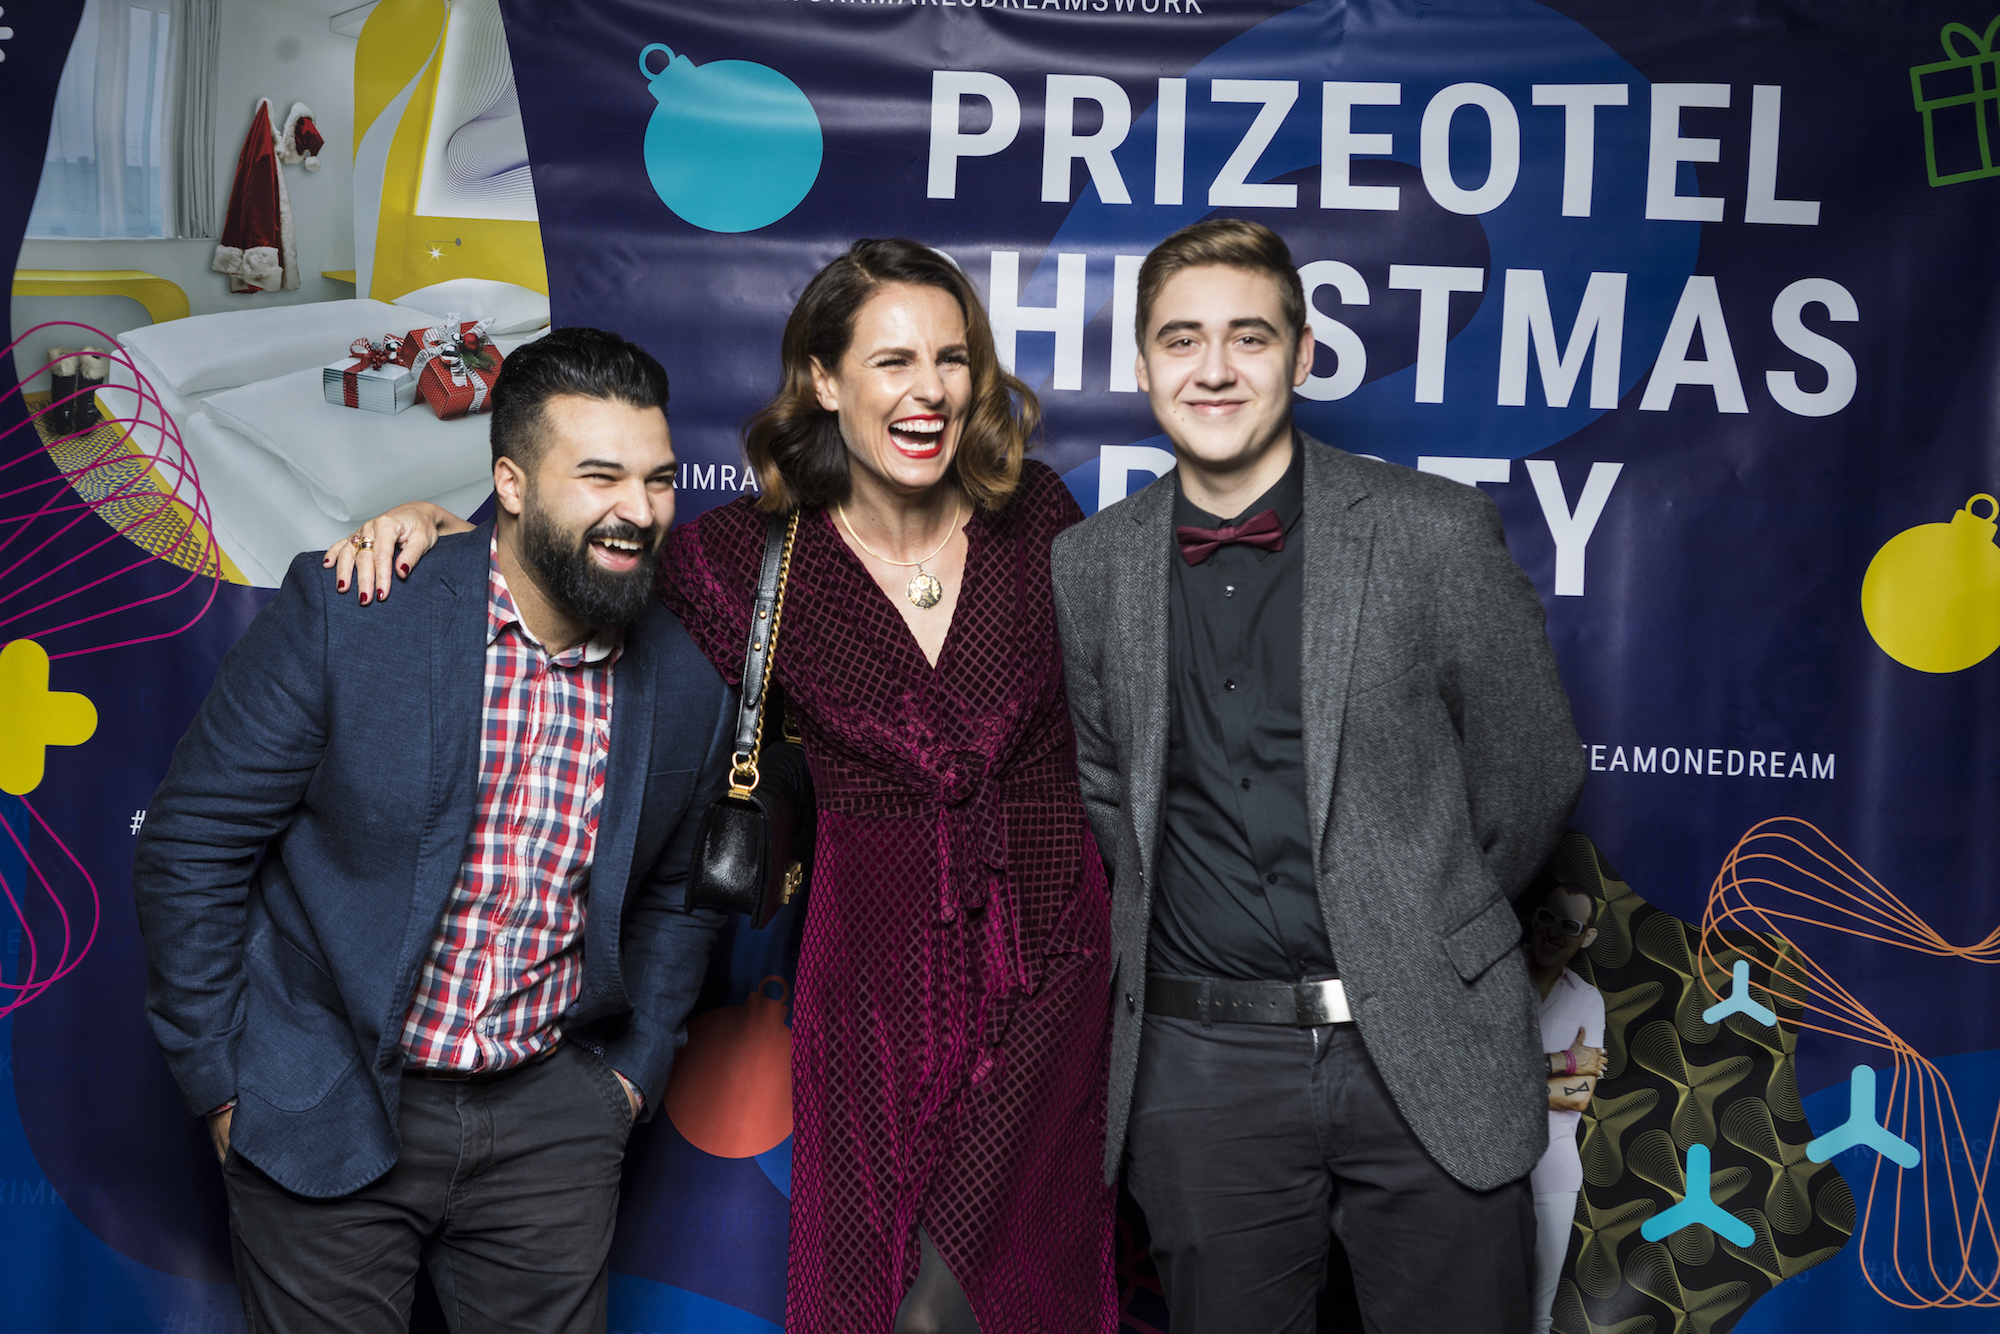 Three prizeotel employees at the Christmas party laughing